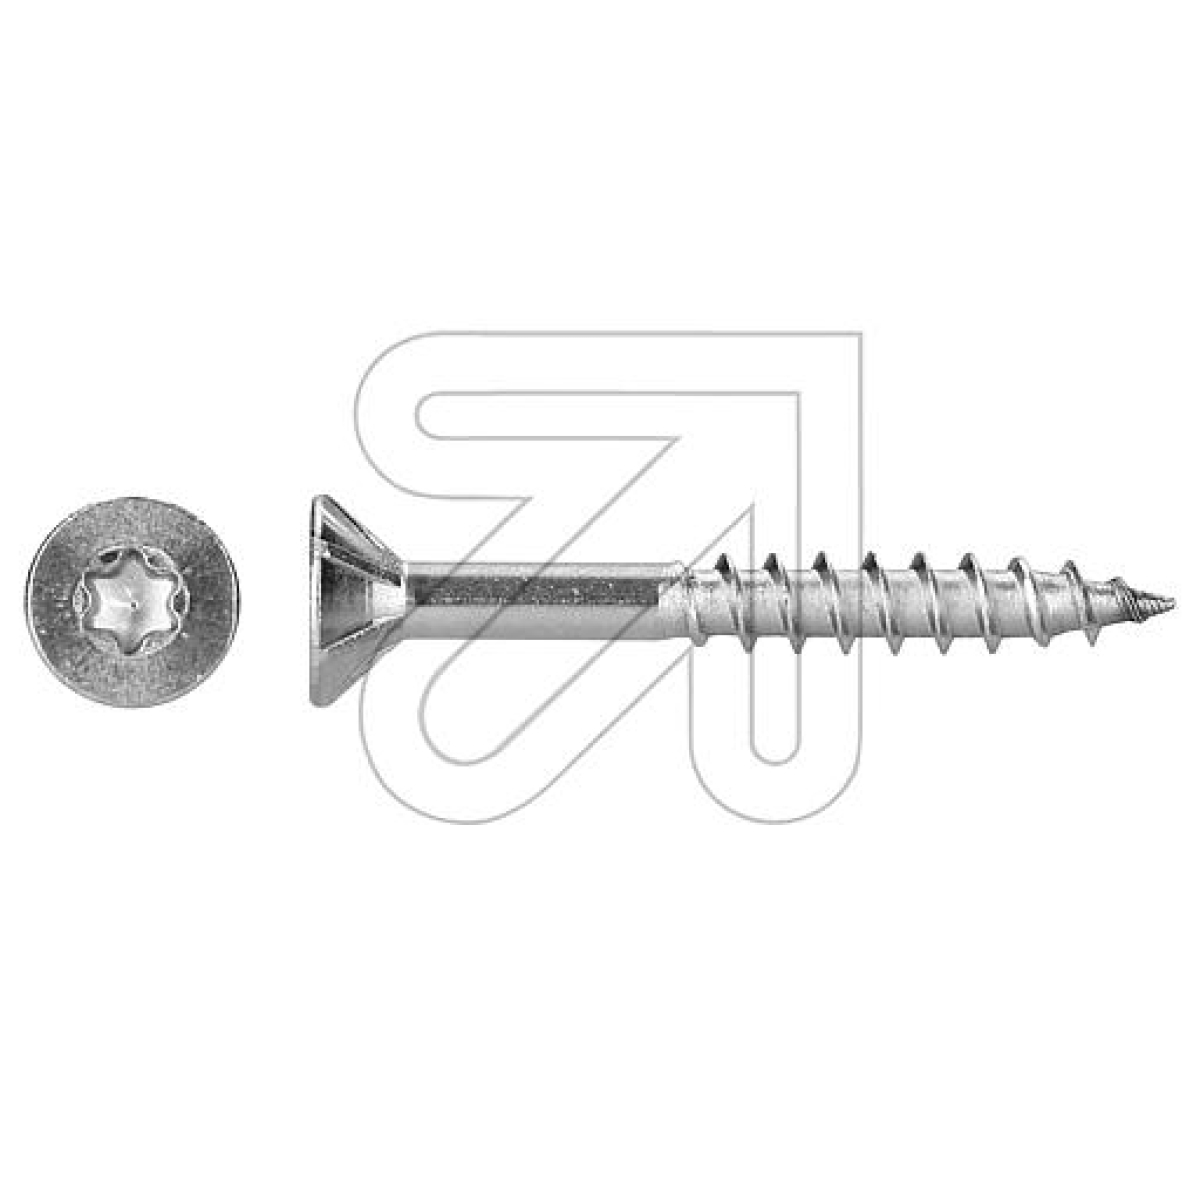 DresselhausJD-79 Countersunk chipboard screws T25 5.0x40 stainless steel A2-Price for 100 pcs.Article-No: 195900